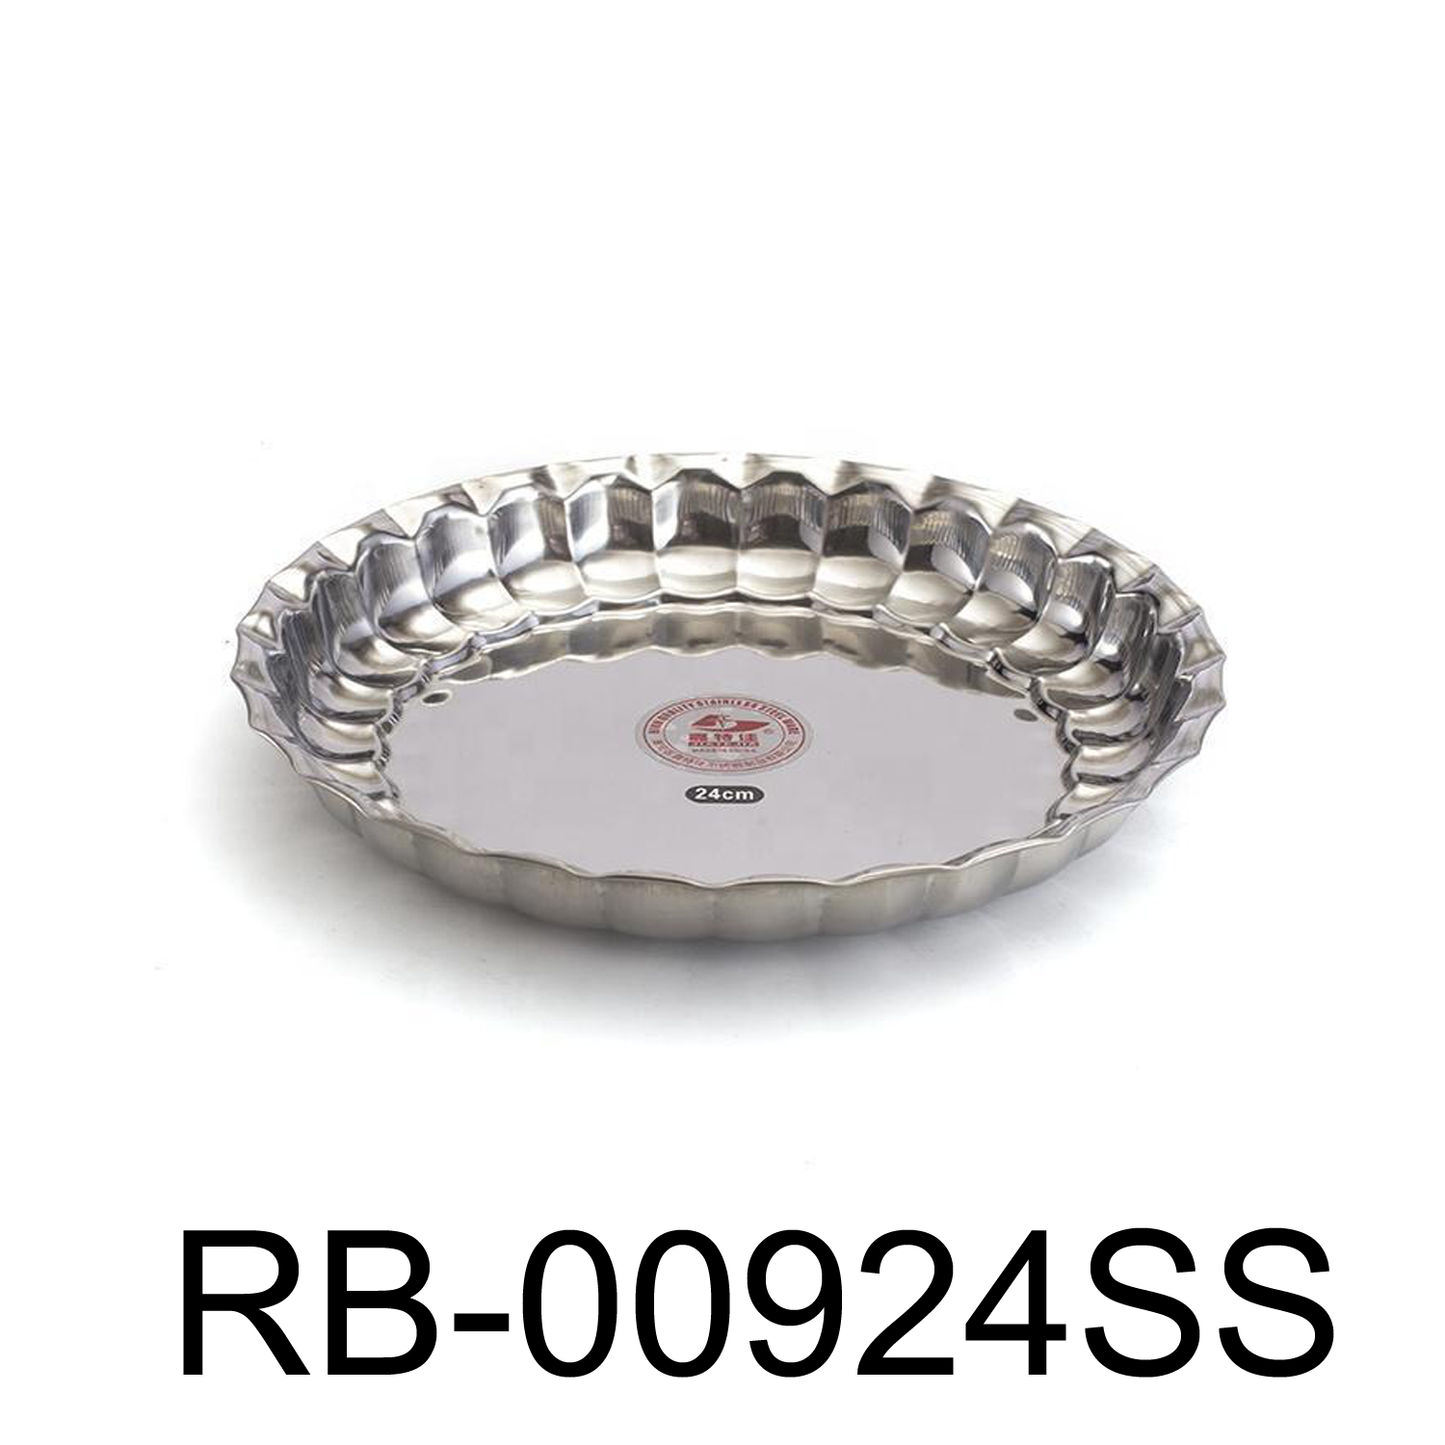 24cm Stainless Steel Round Plate - Food Serving Tray